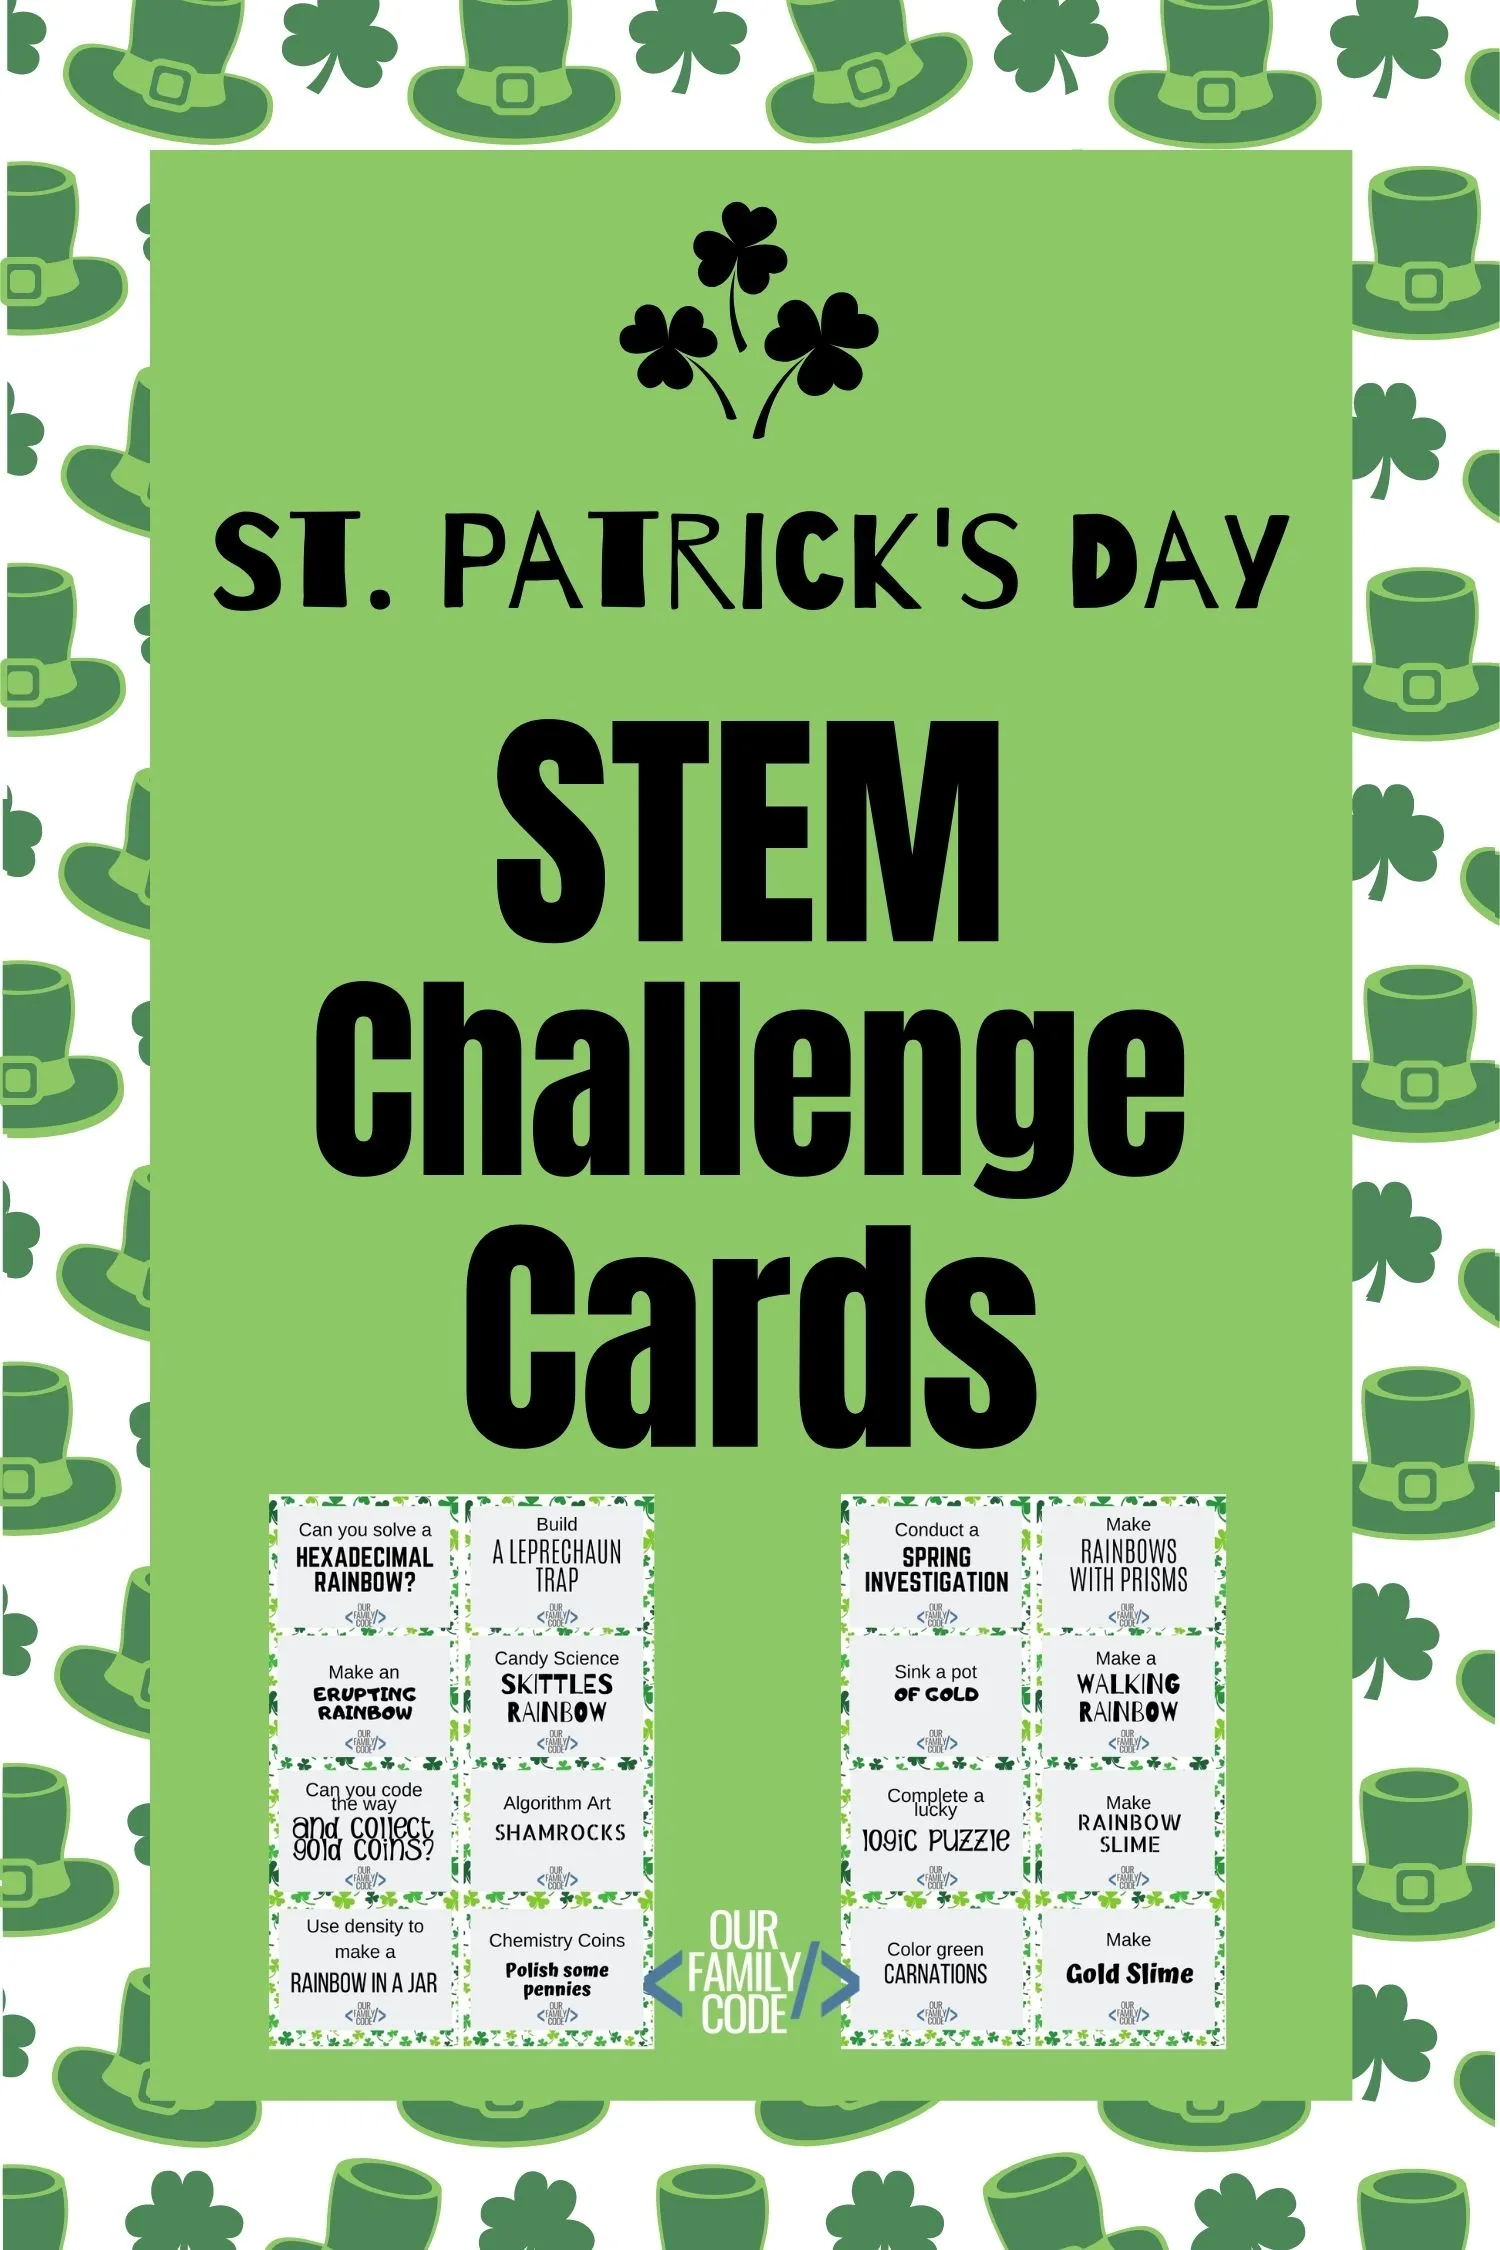 A picture of St. Patrick's Day STEM challenge cards on leprechaun hat background.